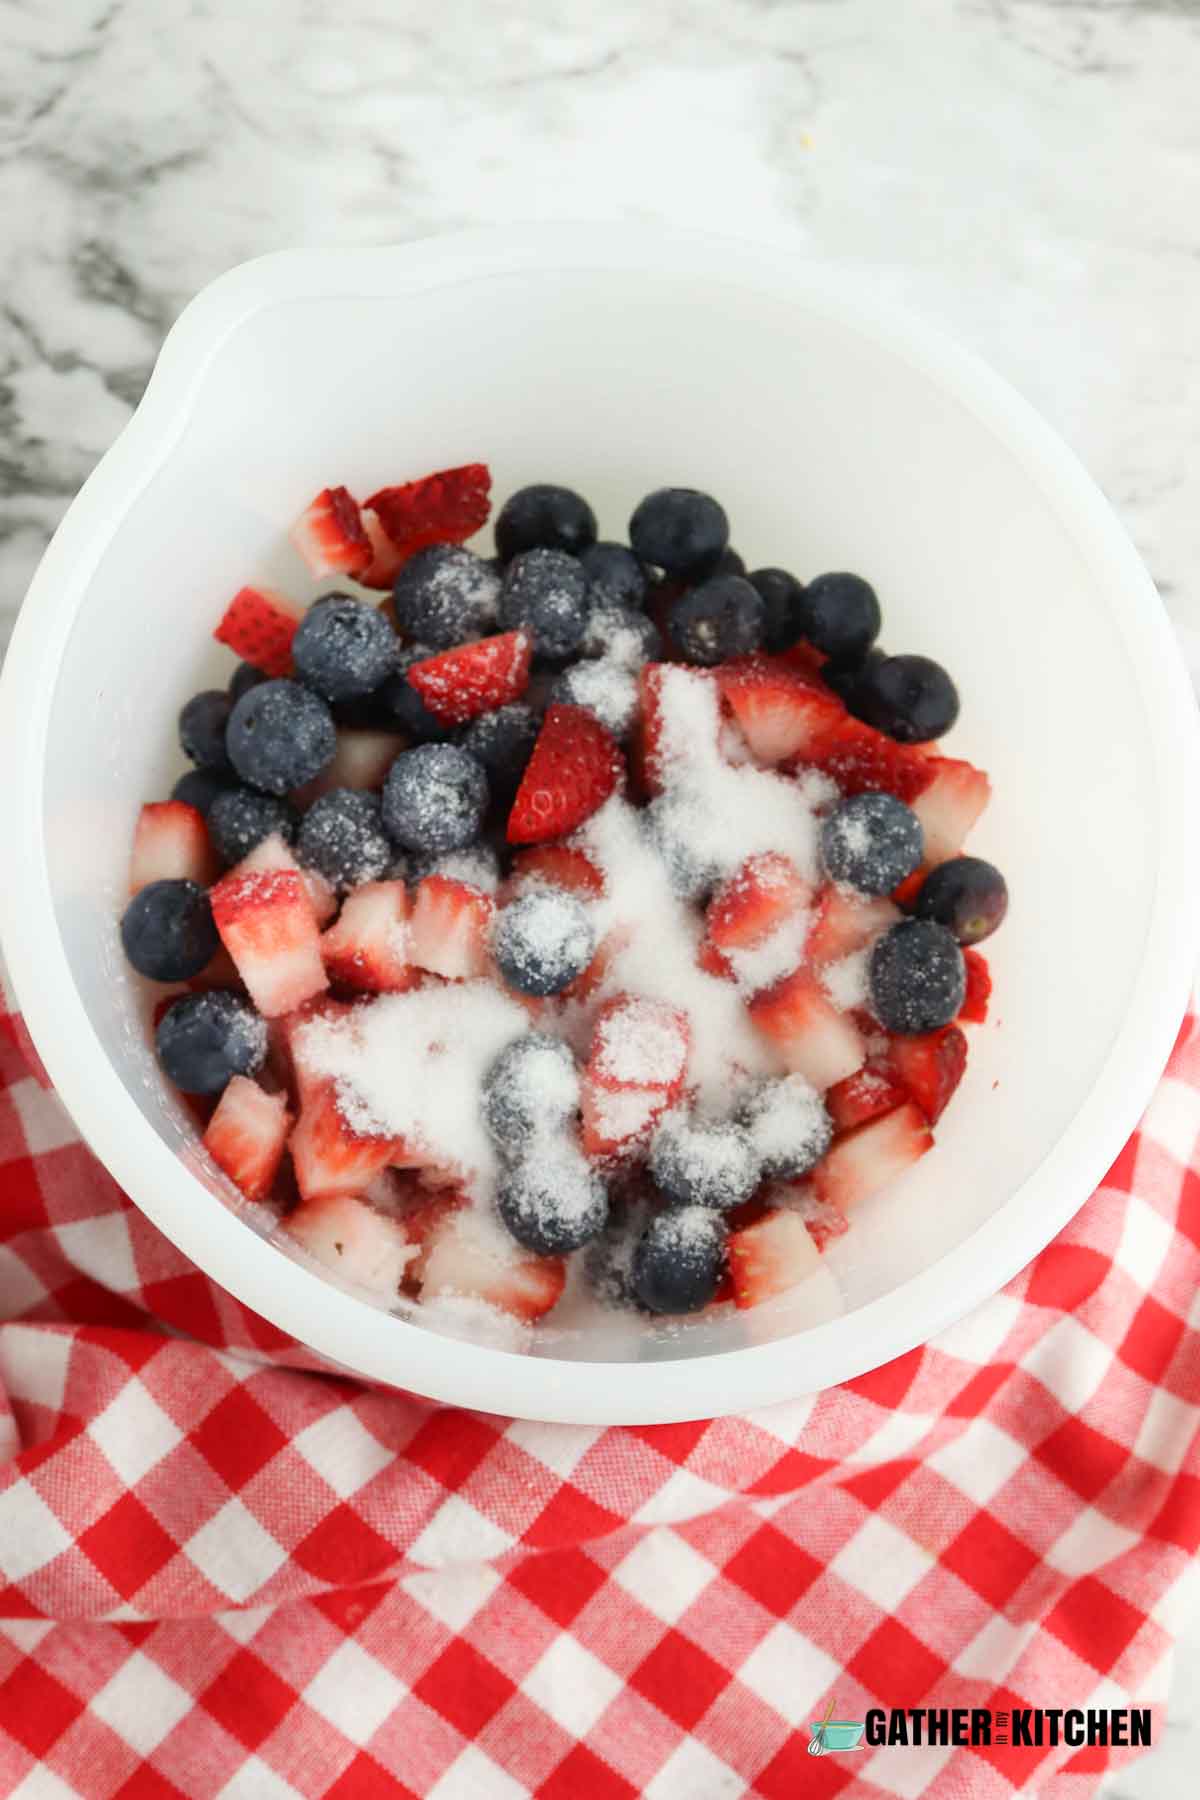 Bowl with strawberries and blueberries with sugar sprinkled over the top.